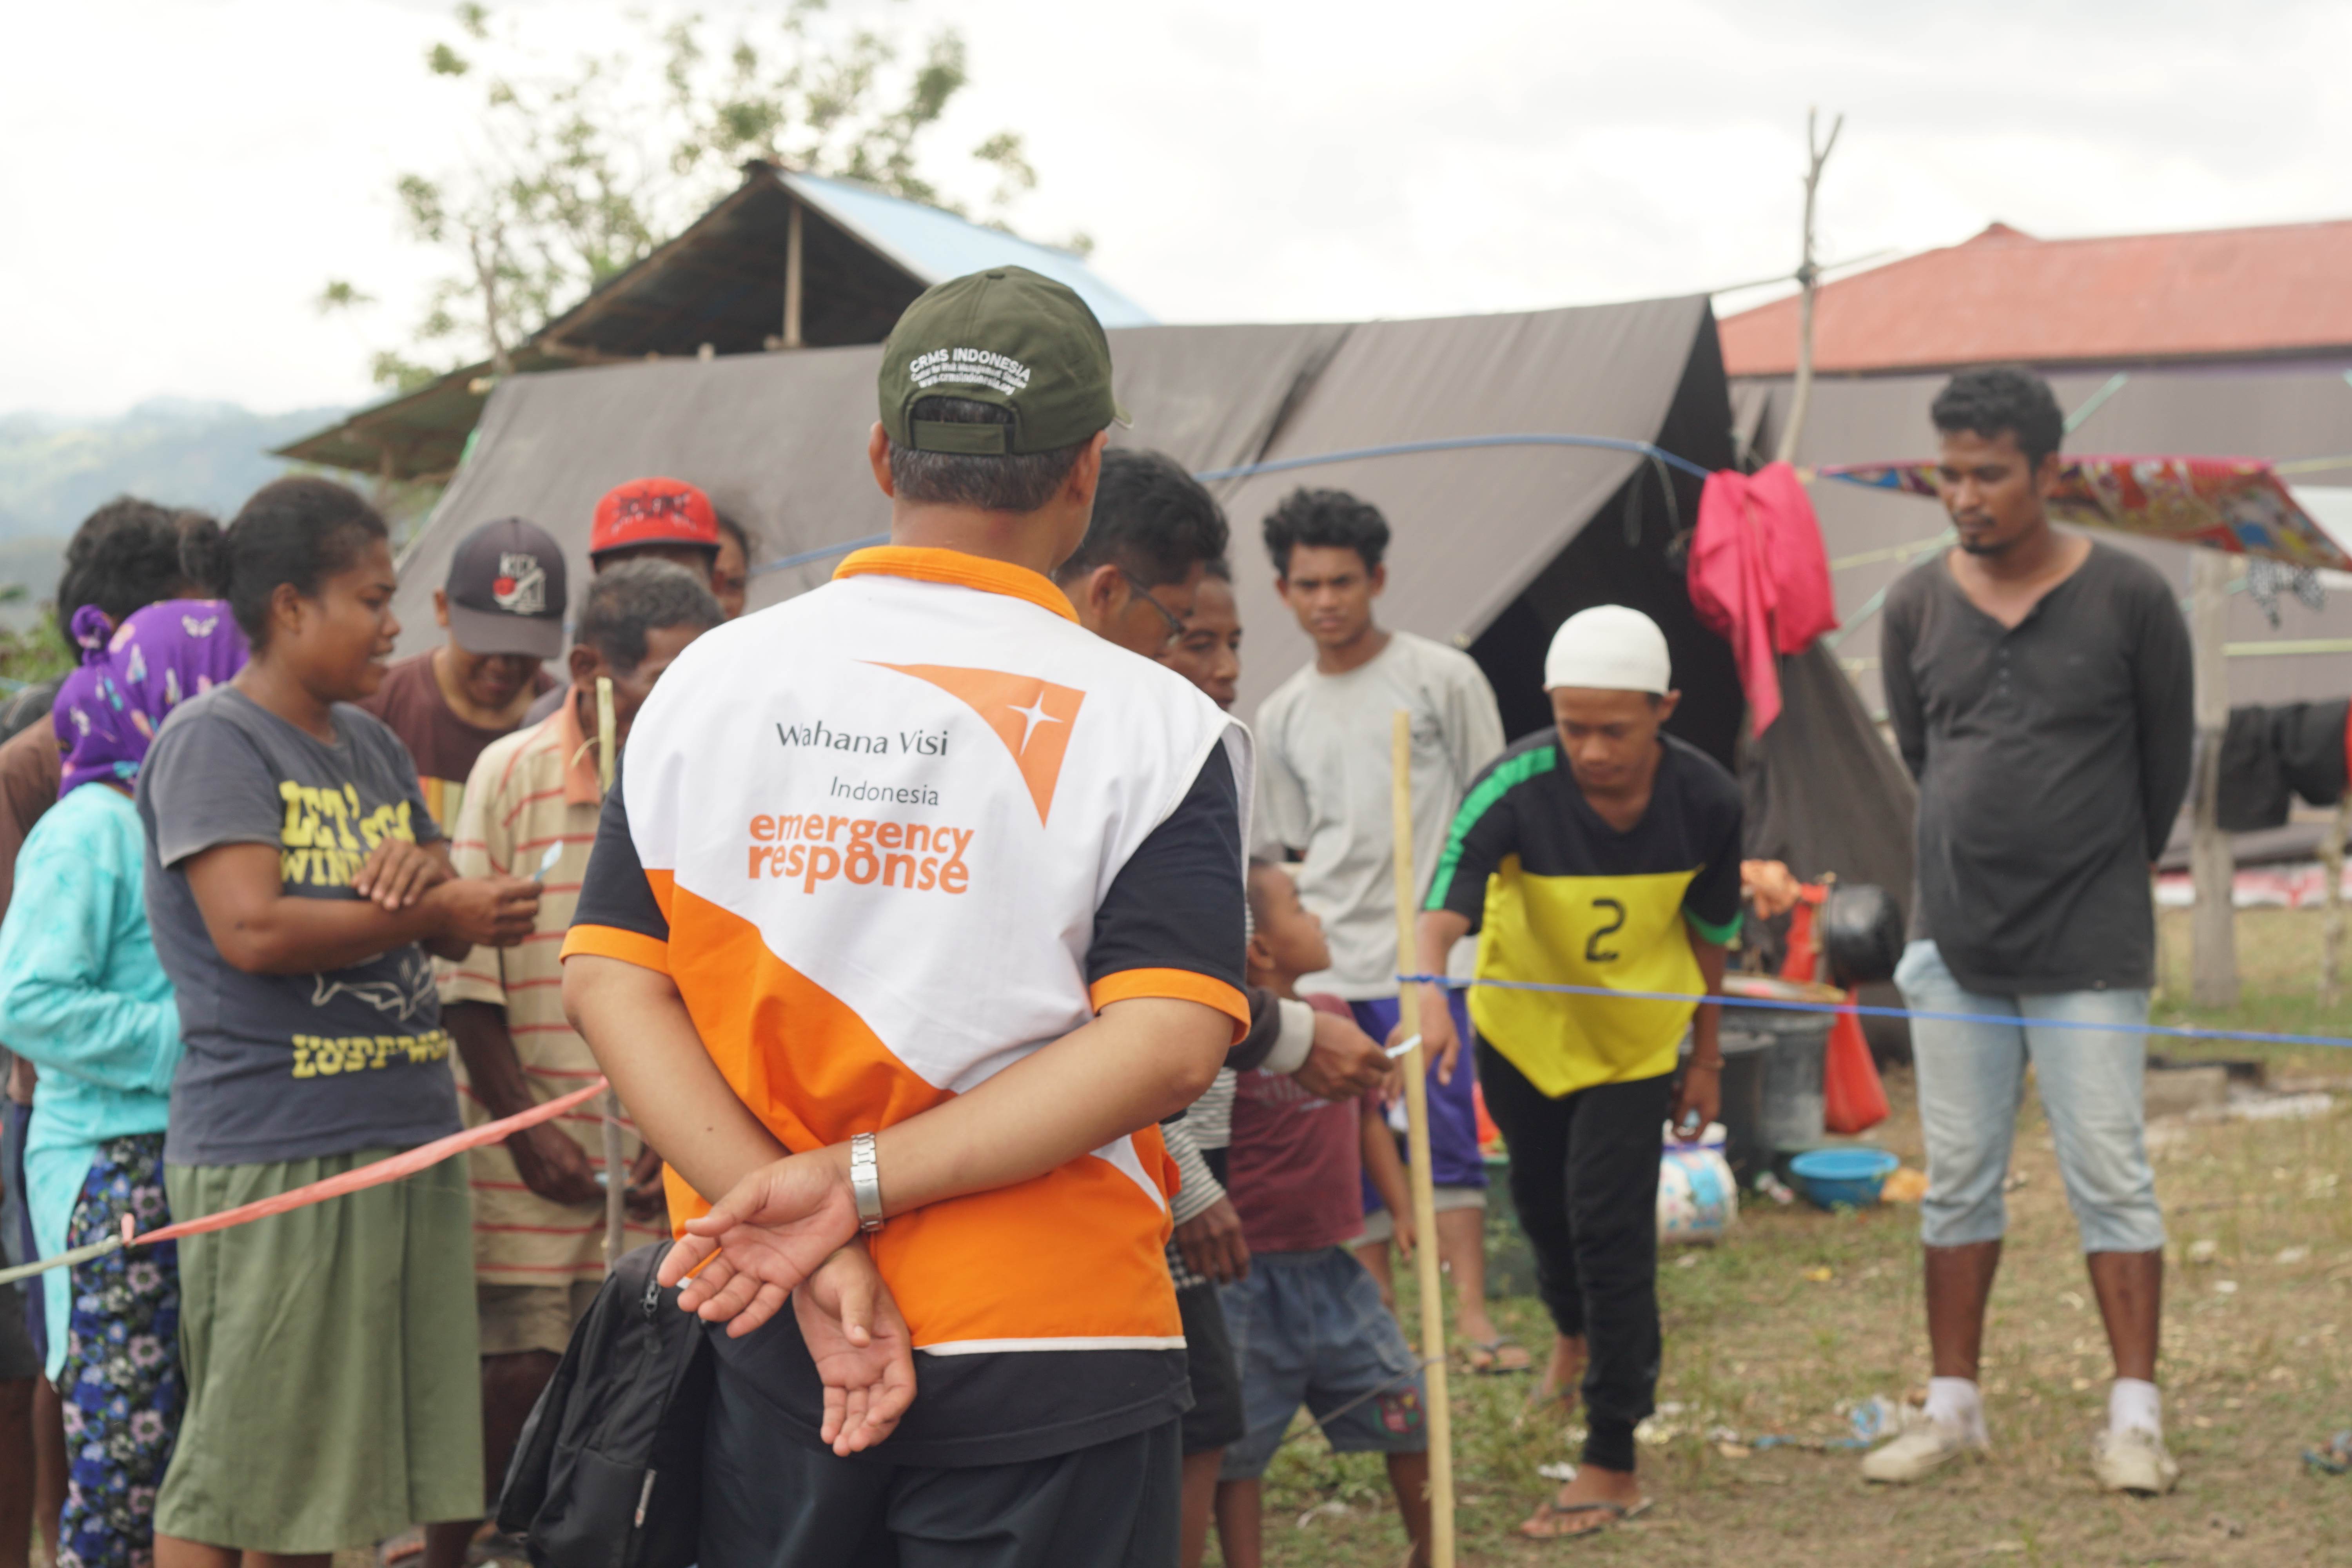 World Vision response worker in Indonesia stands looking towards a line of people standing in front of tents